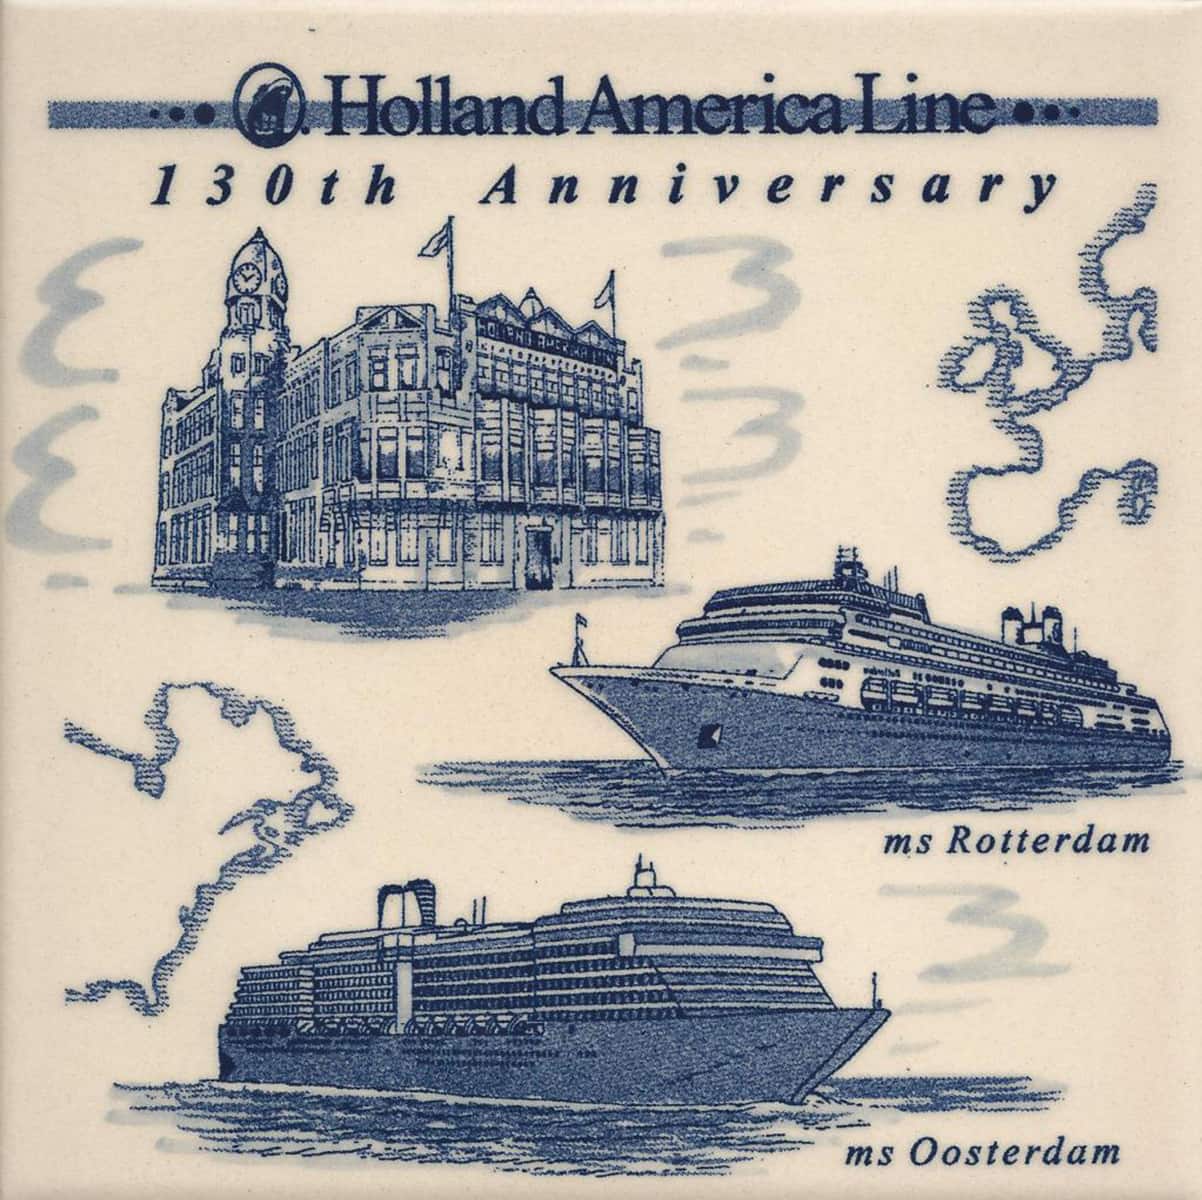 Rotterdam and MS Oosterdam, Holland America Line 130th anniversary commemorative tile, 2003